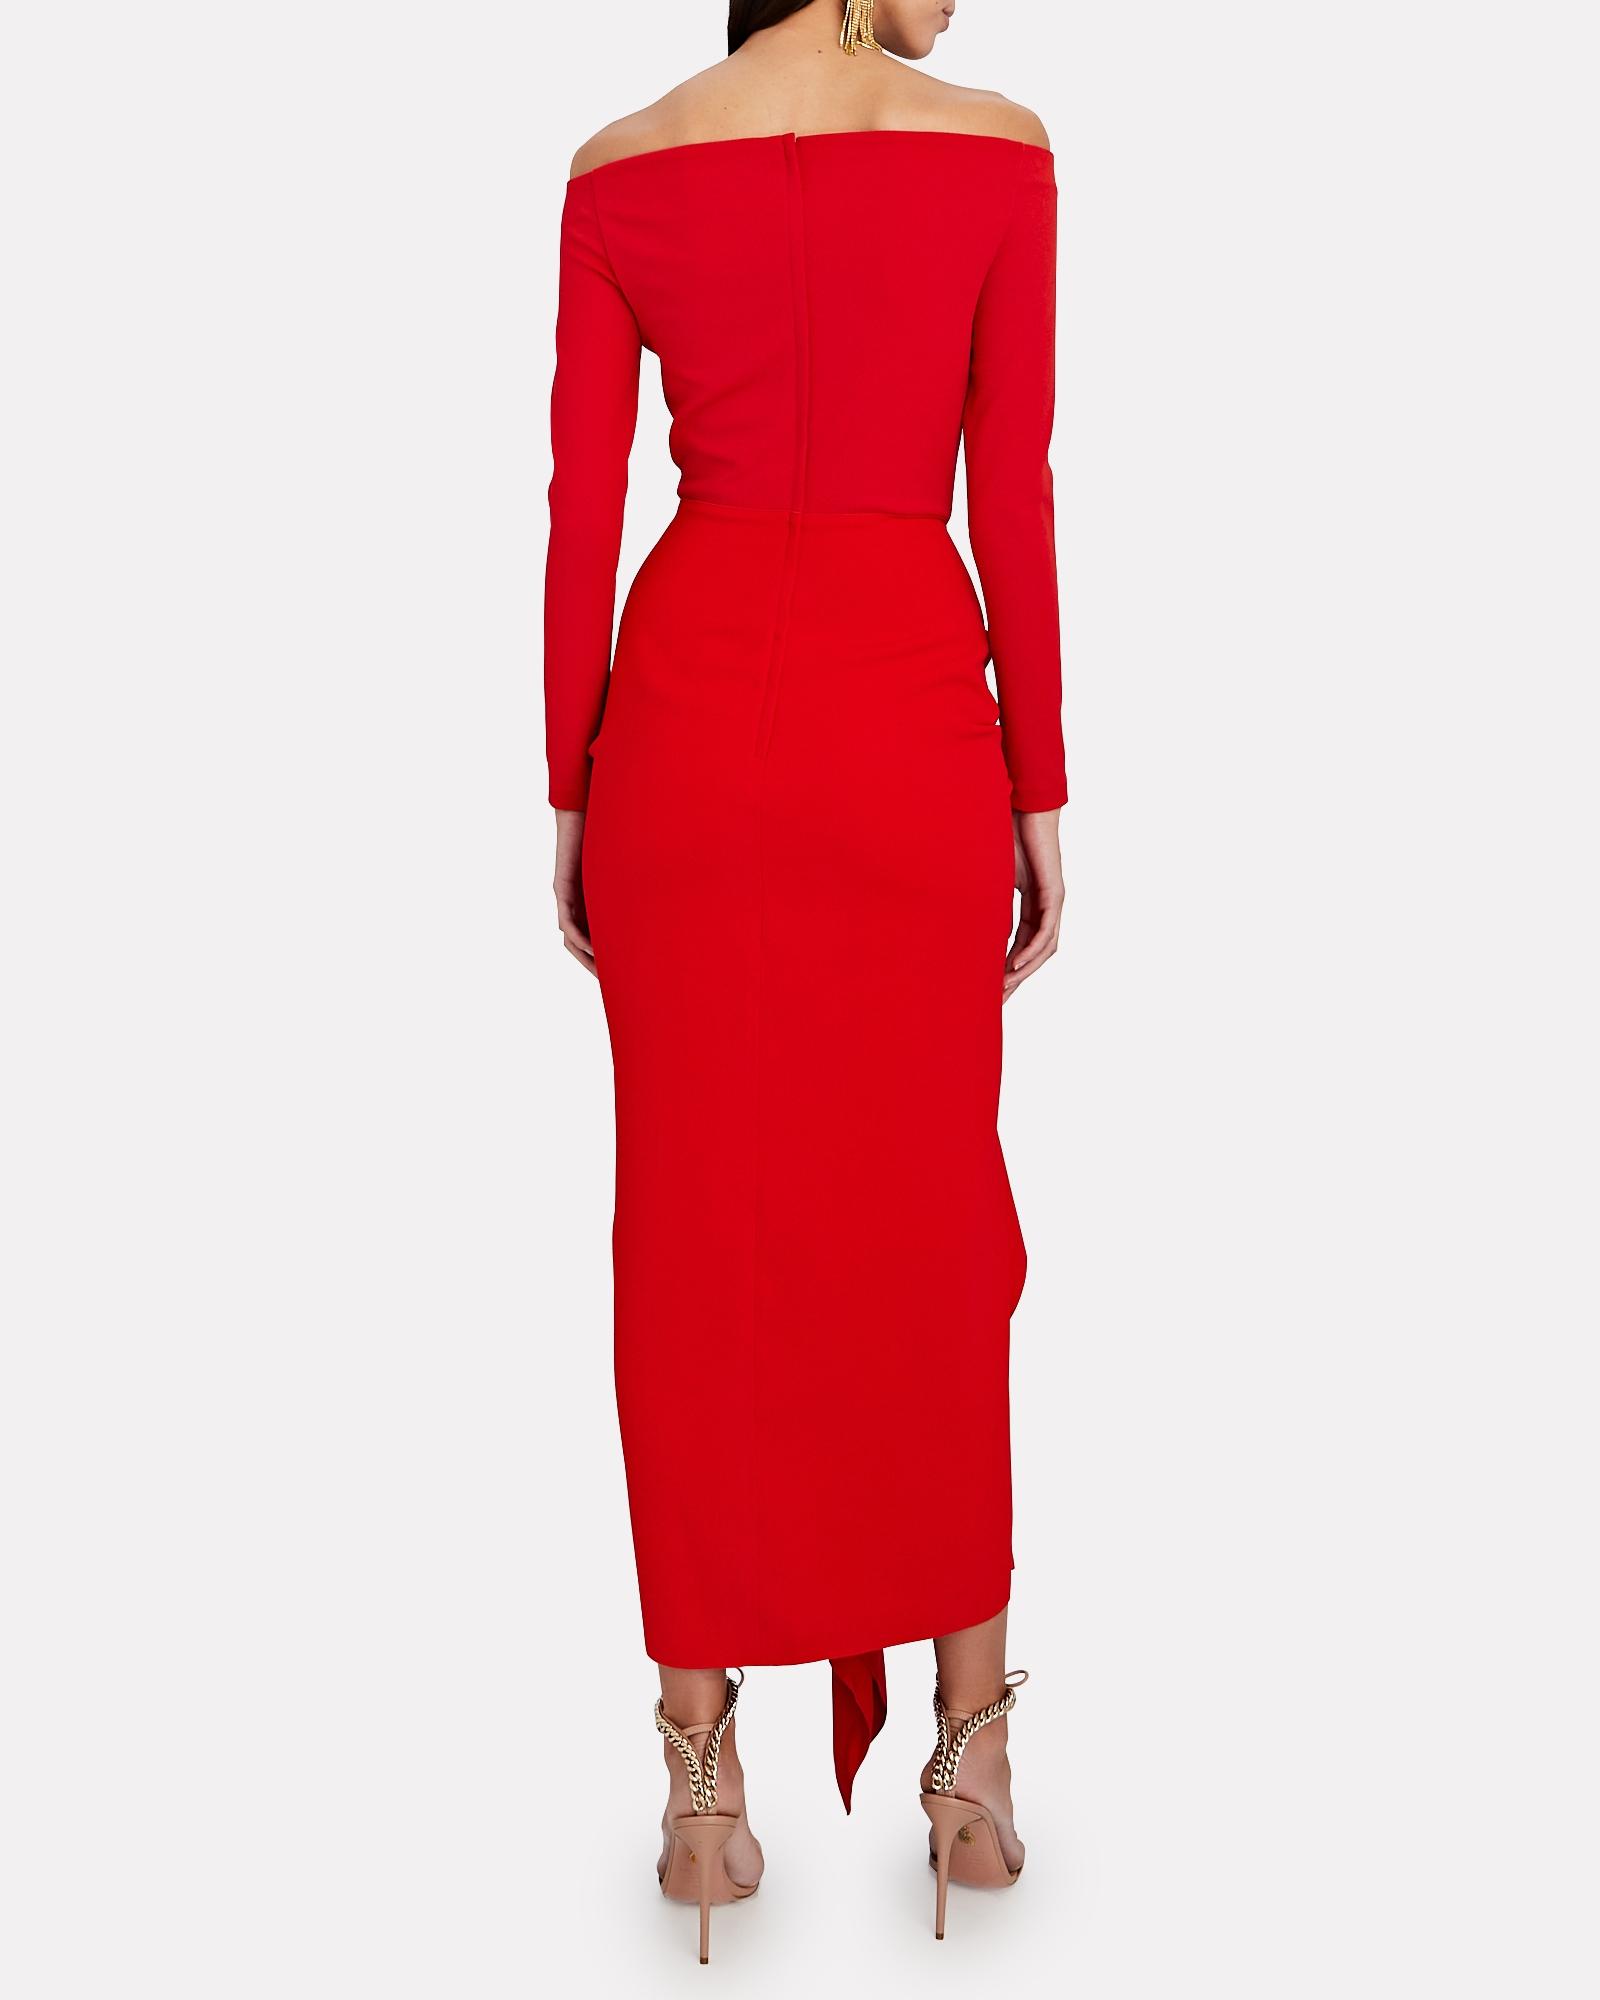 Solace London Lotus Off-the-shoulder Midi Dress in Red | Lyst